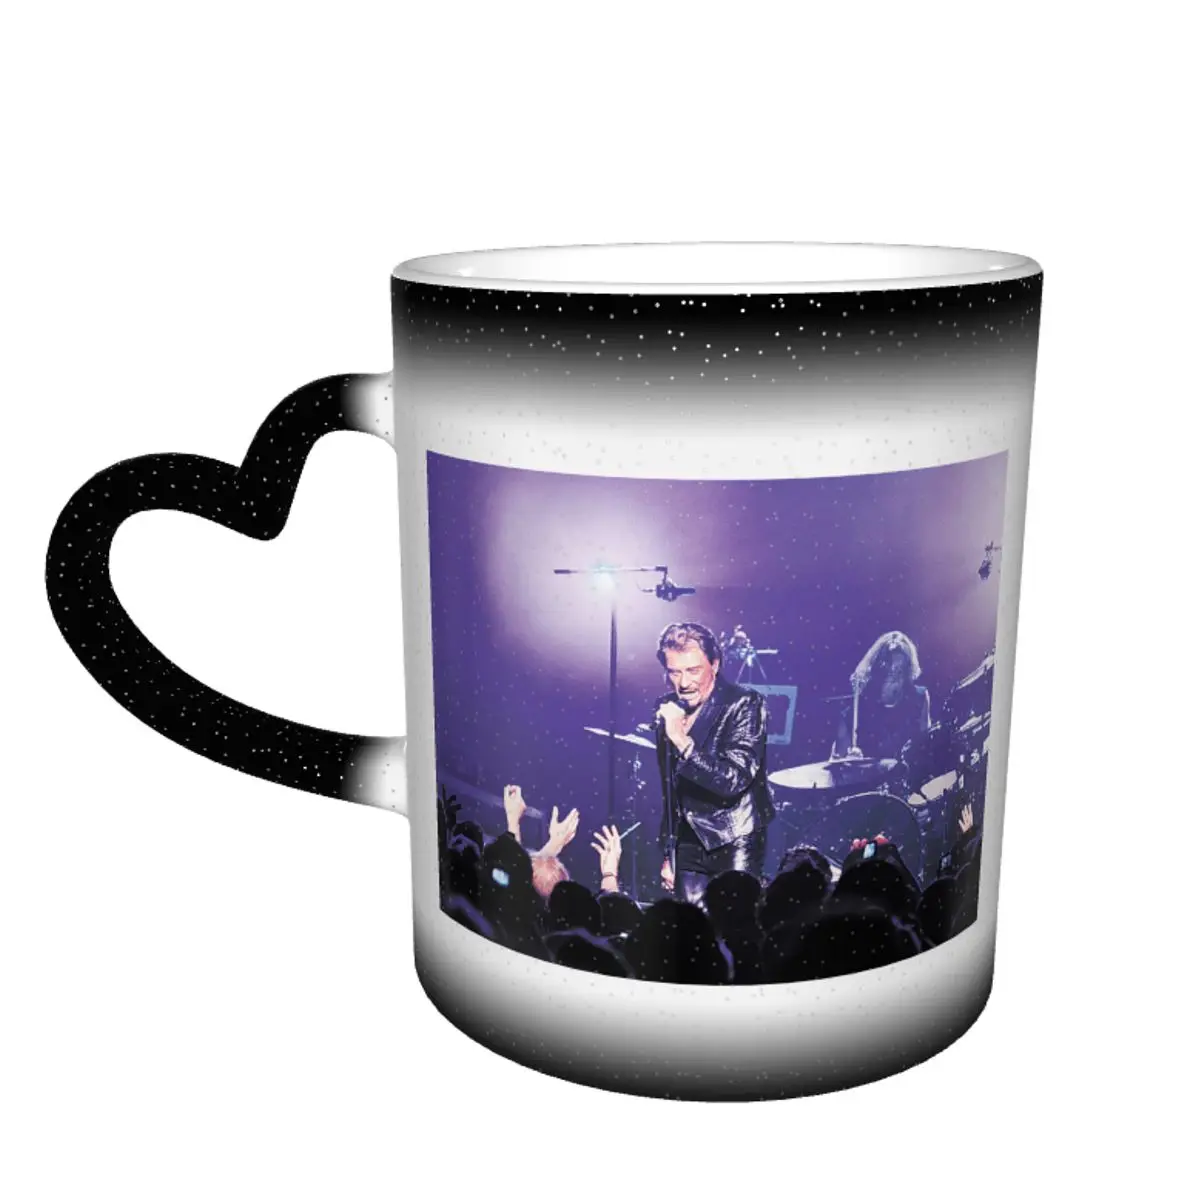 

Vive Le Roi Du Rock 'n' Roll Financial Times Color Changing Mug in the Sky Creative Ceramic Heat-sensitive Cup Novelty Beer mugs